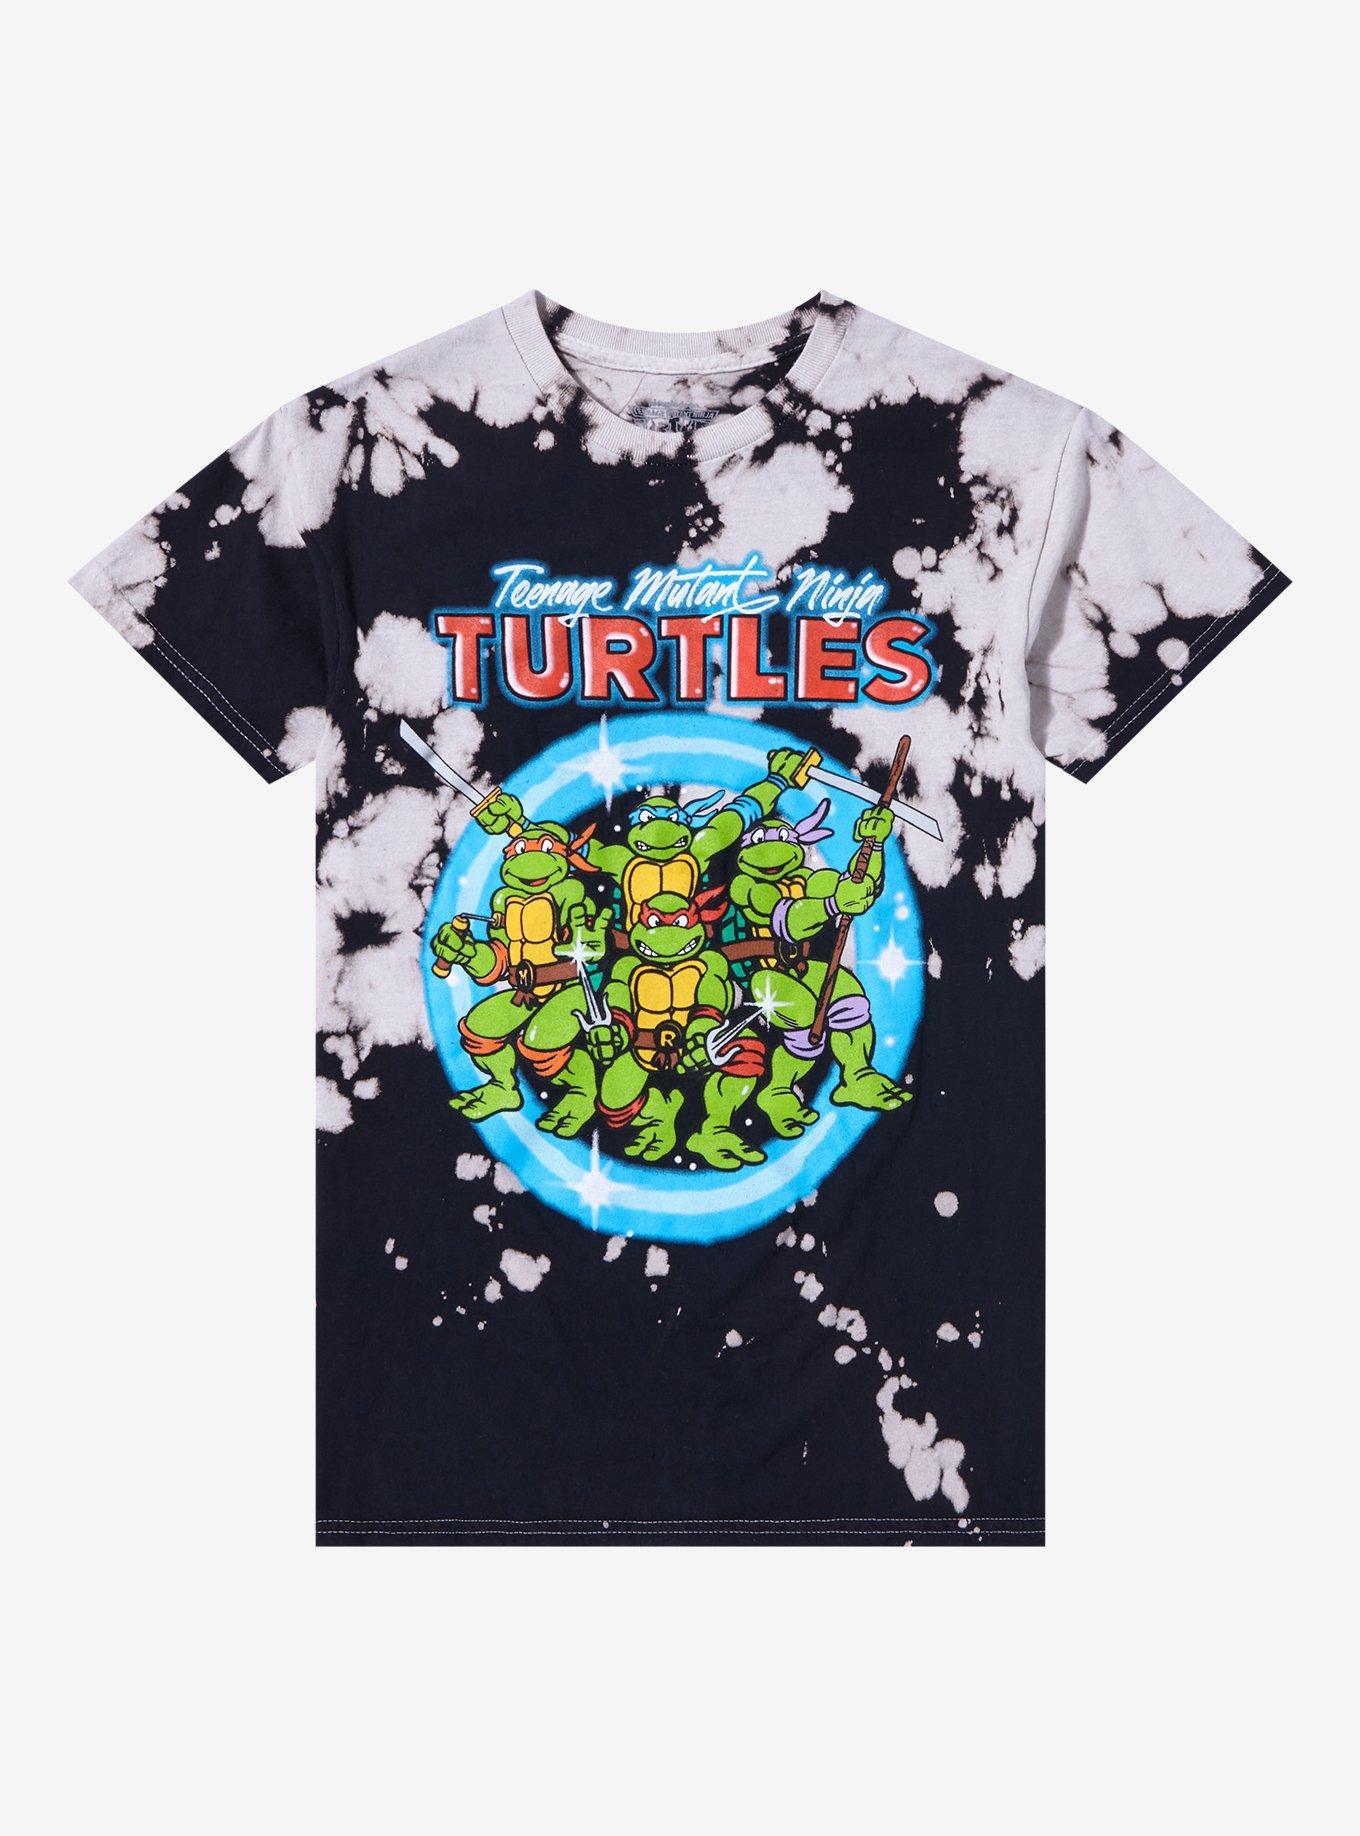 Rise of the Teenage Mutant Ninja Turtles Kids T-Shirt for Sale by